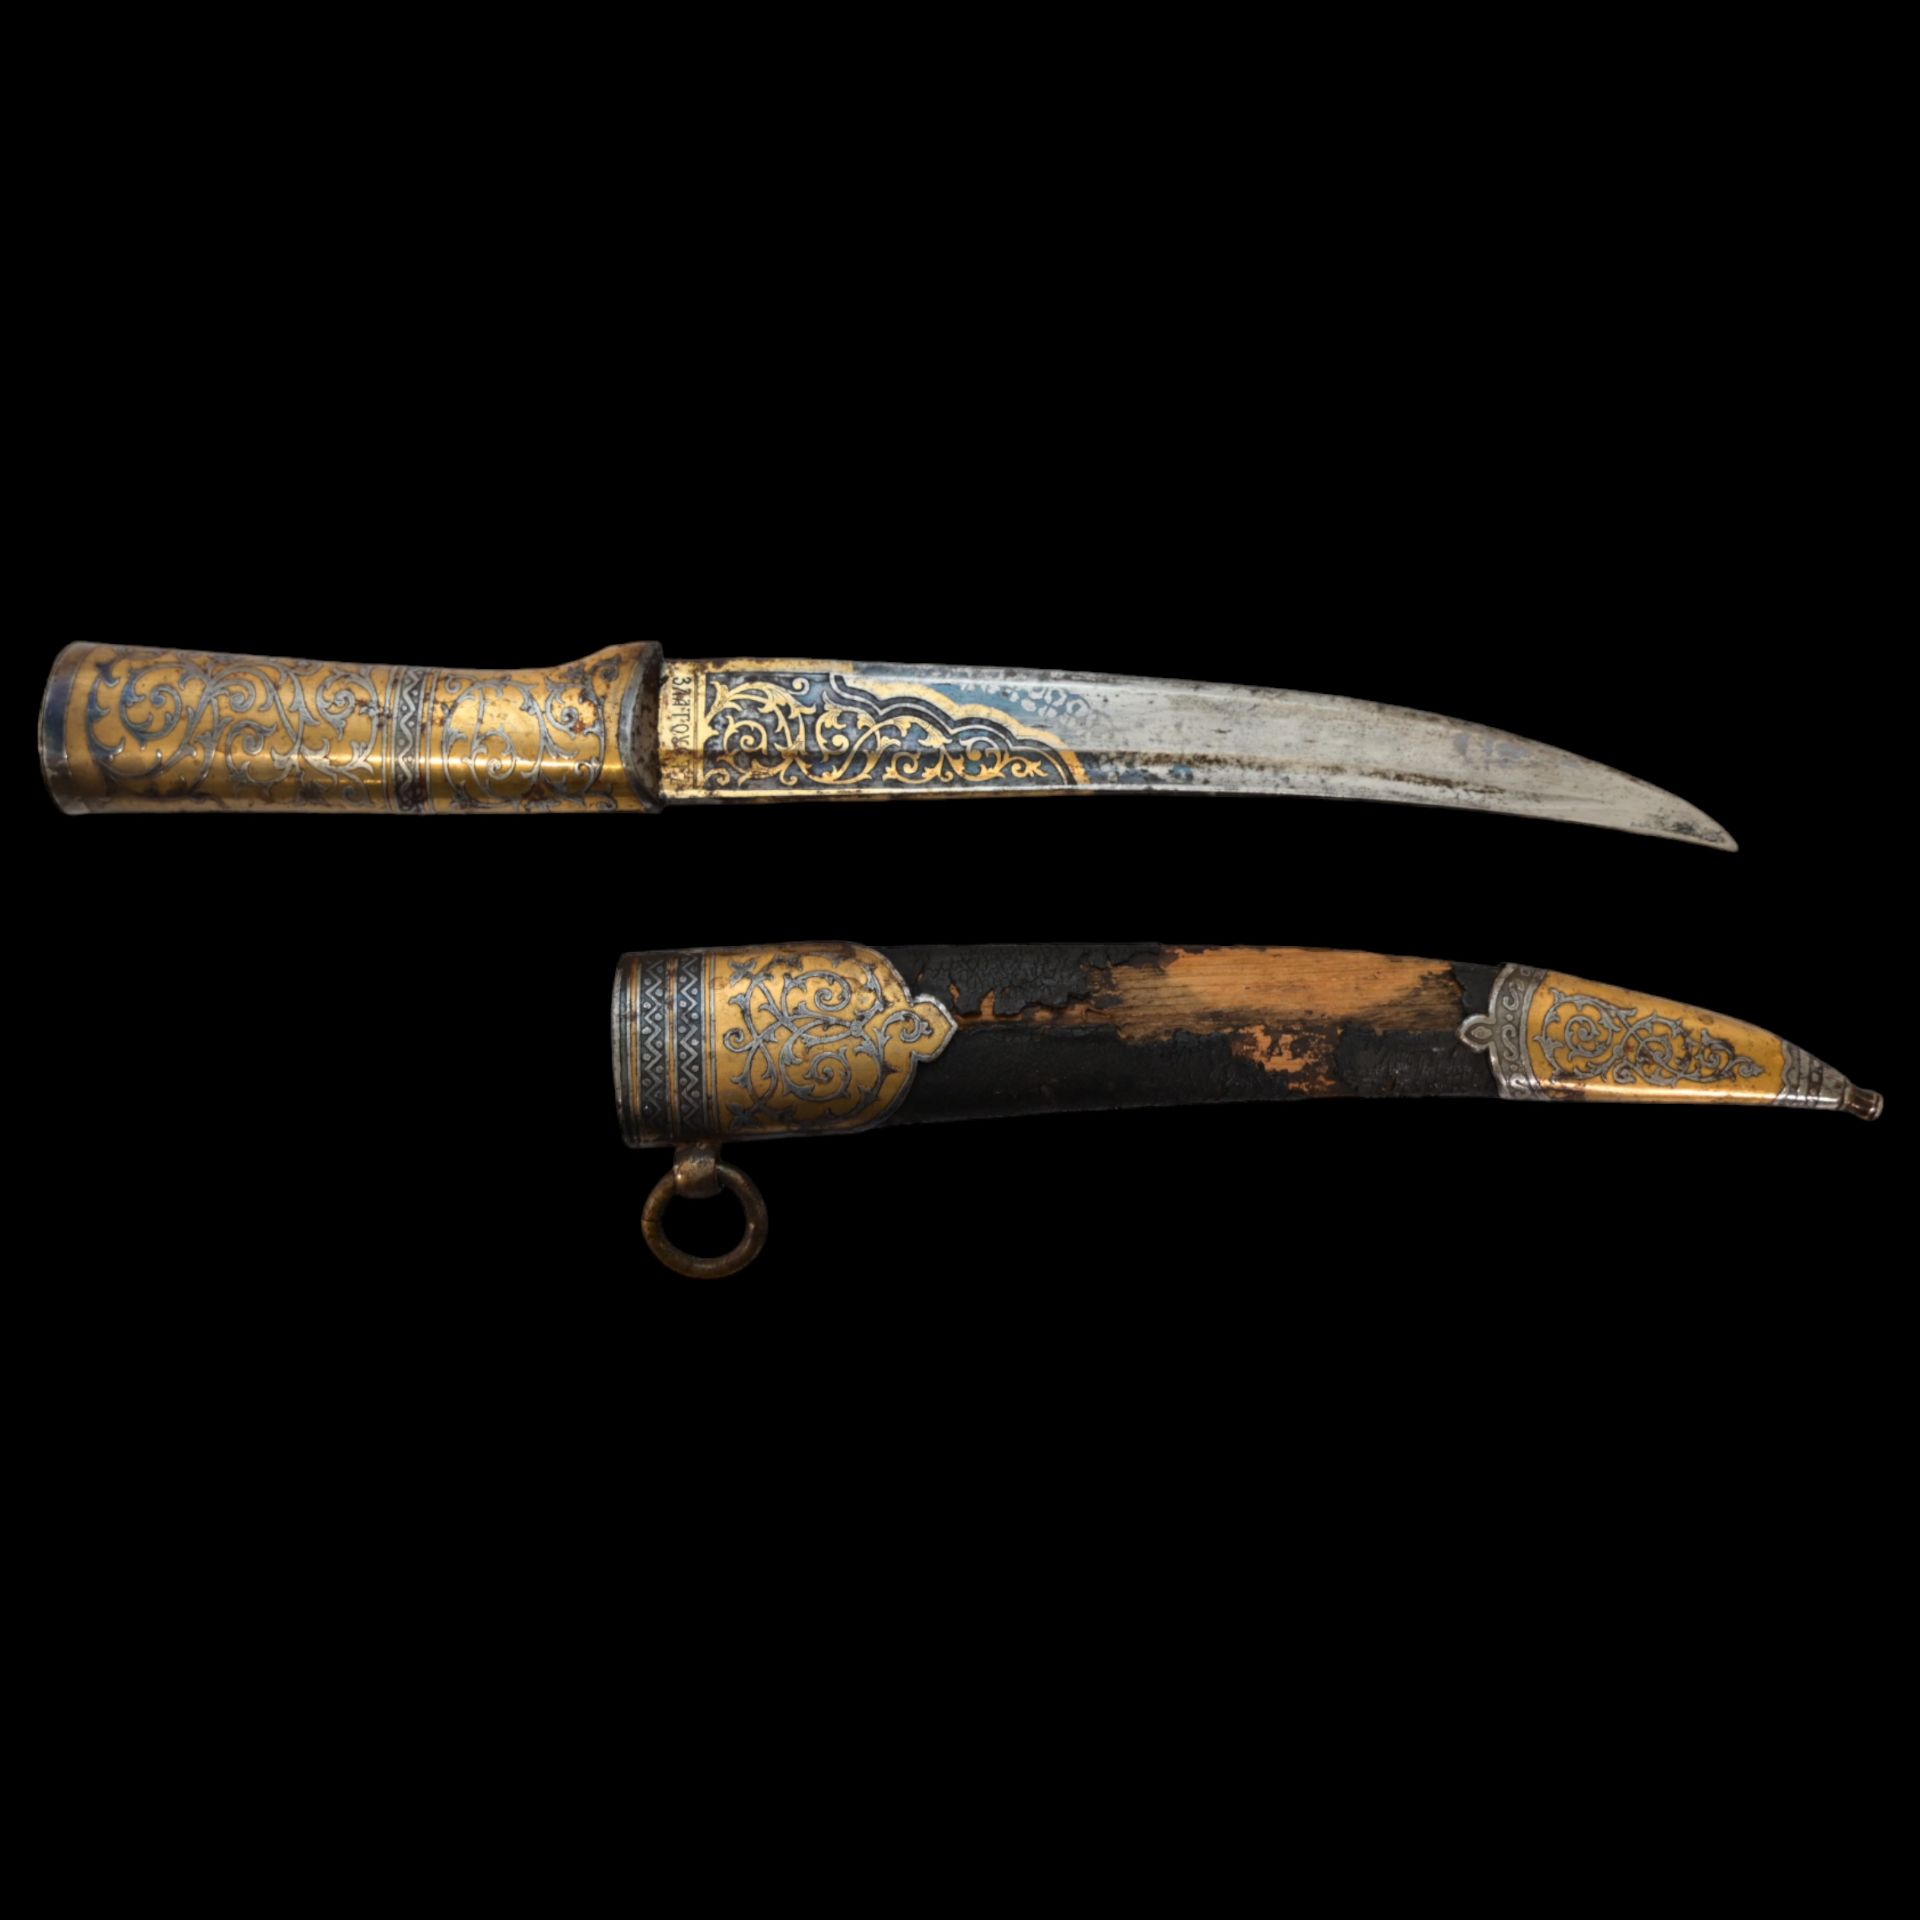 RARE HUNTING KNIFE, DECORATED WITH GOLD AND BLUE, RUSSIAN EMPIRE, ZLATOUST, 1889. - Image 22 of 26